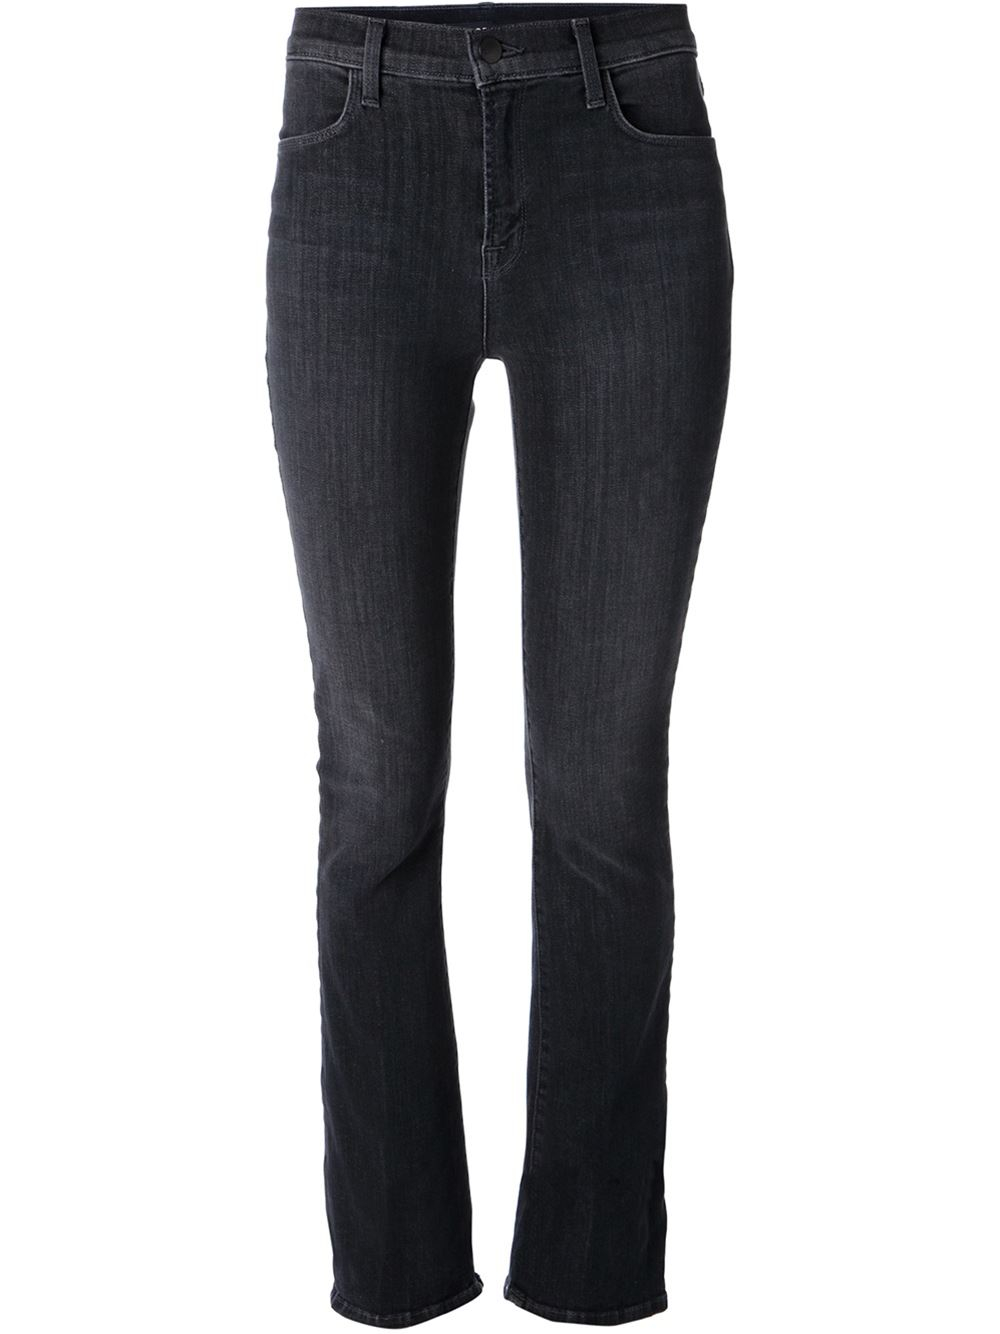 J Brand Bootcut Jeans in Gray (grey) | Lyst